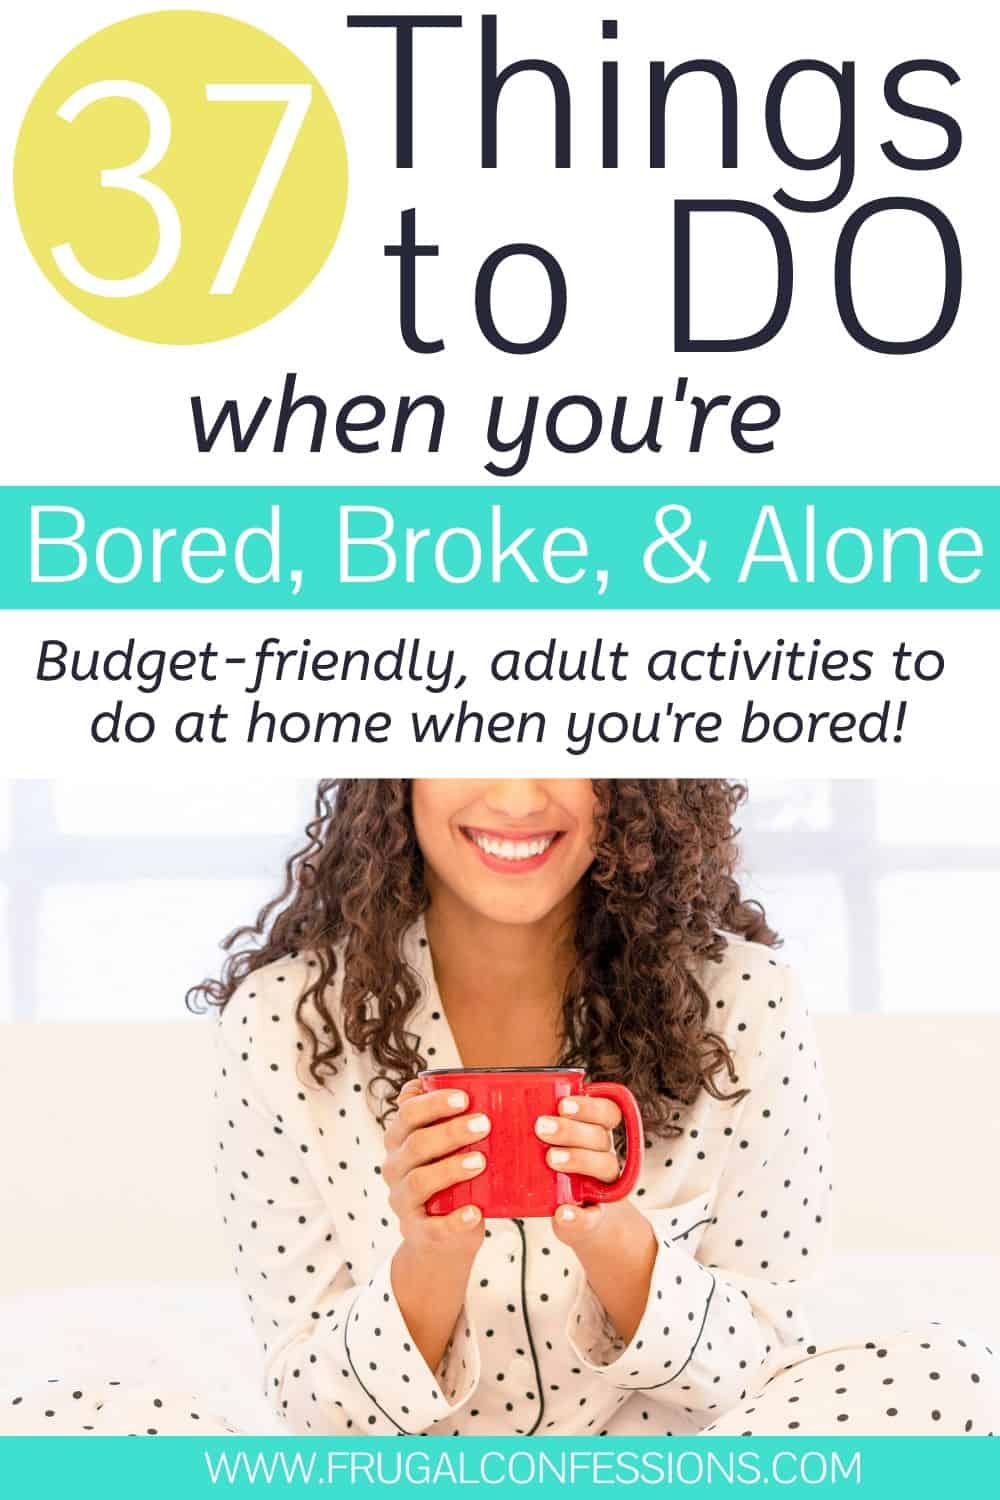 woman smiling, holding mug of hot cocoa, text overlay "37 things to do when you're bored and broke and alone"